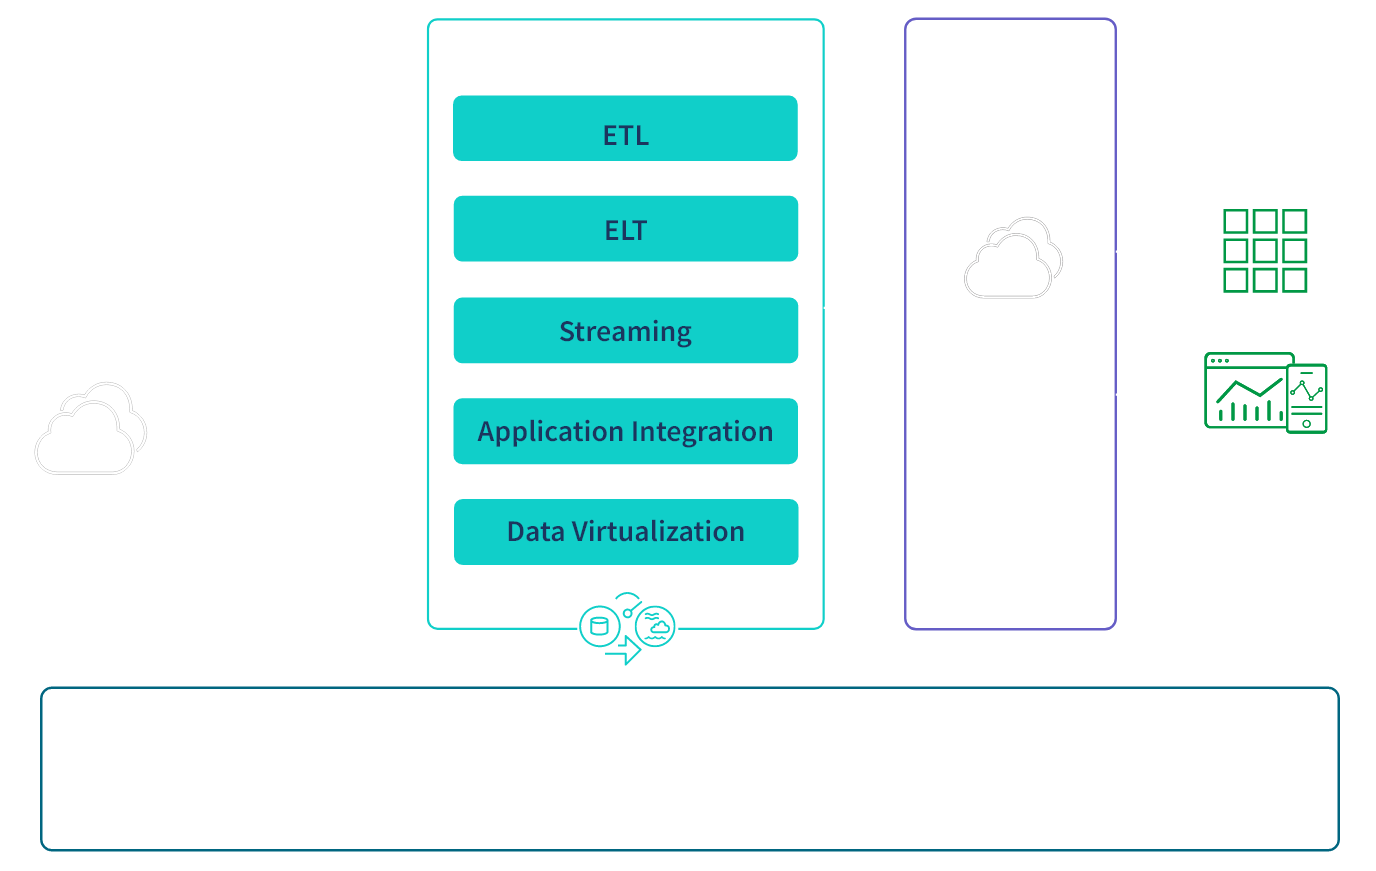 Diagram showing how data sources are processed and stored for use in analytics and apps